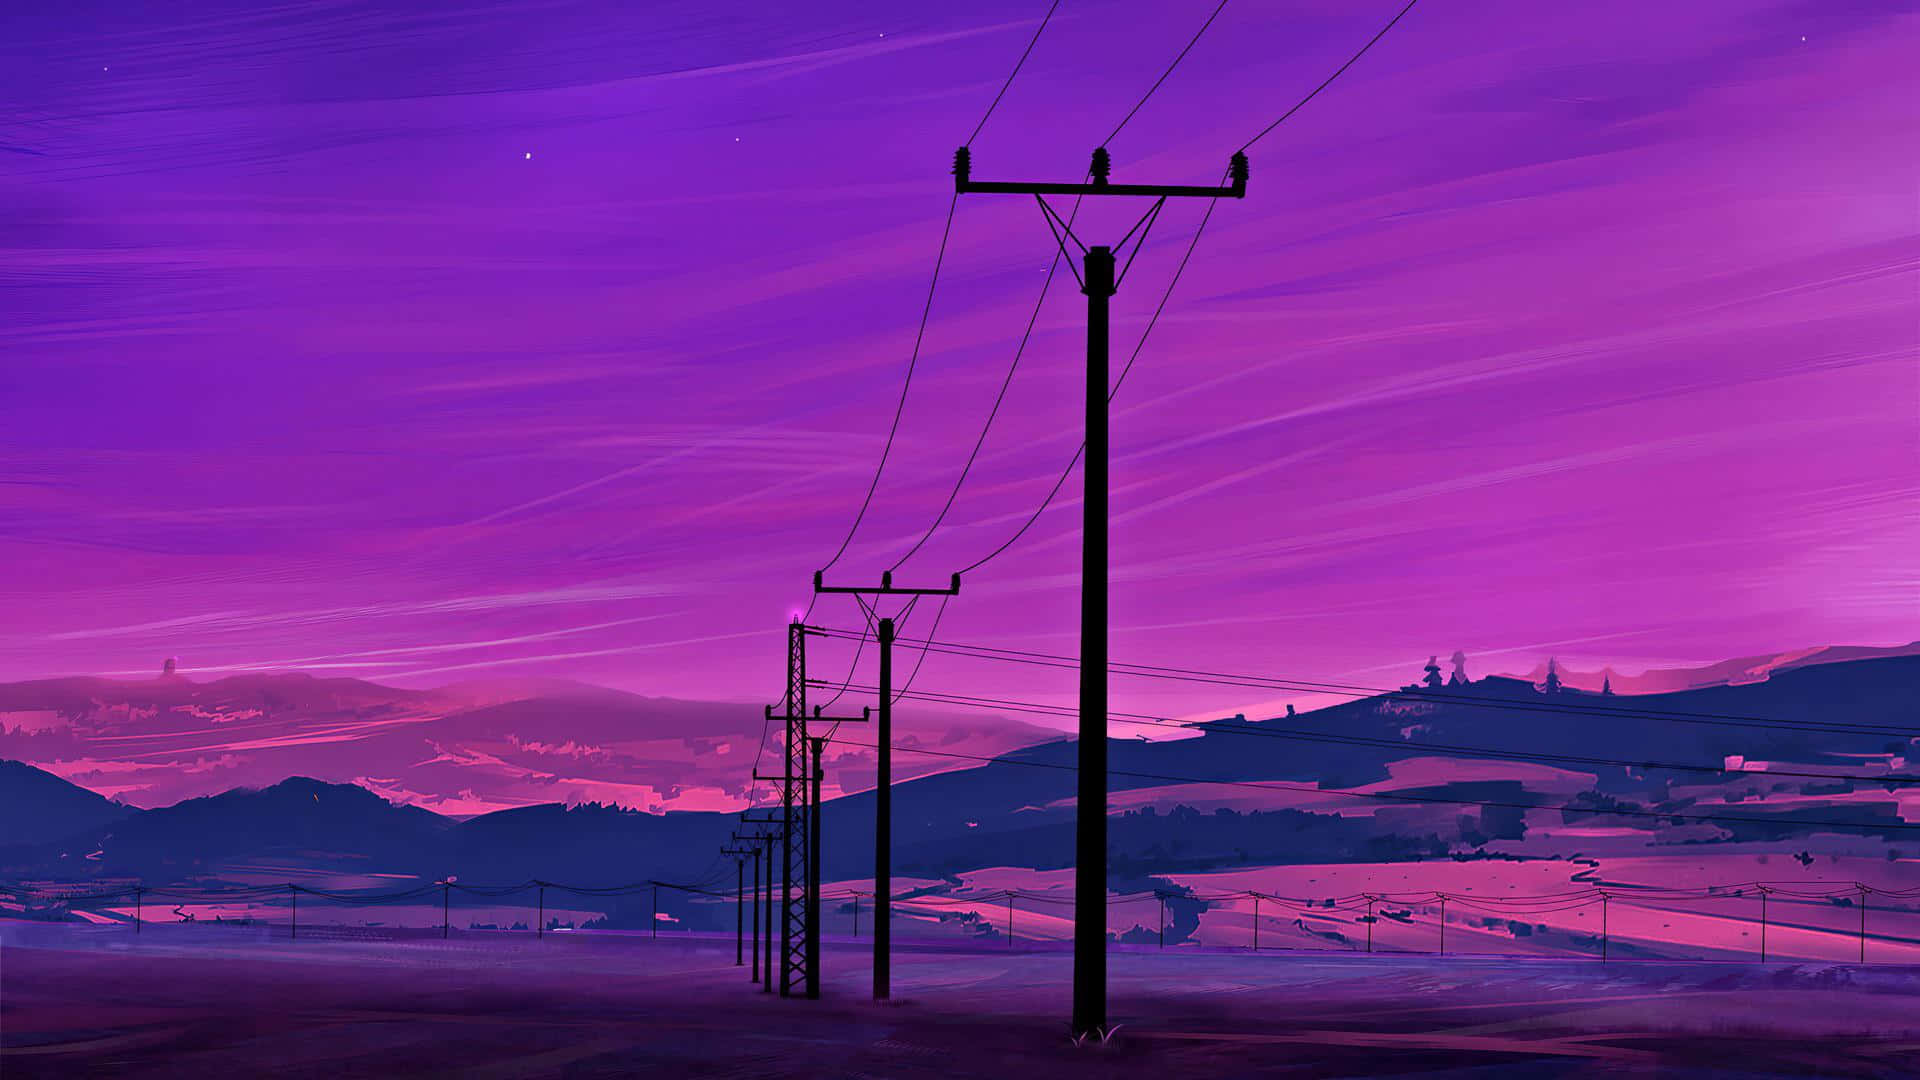 A Purple Sky With A Telephone Pole And Mountains Wallpaper